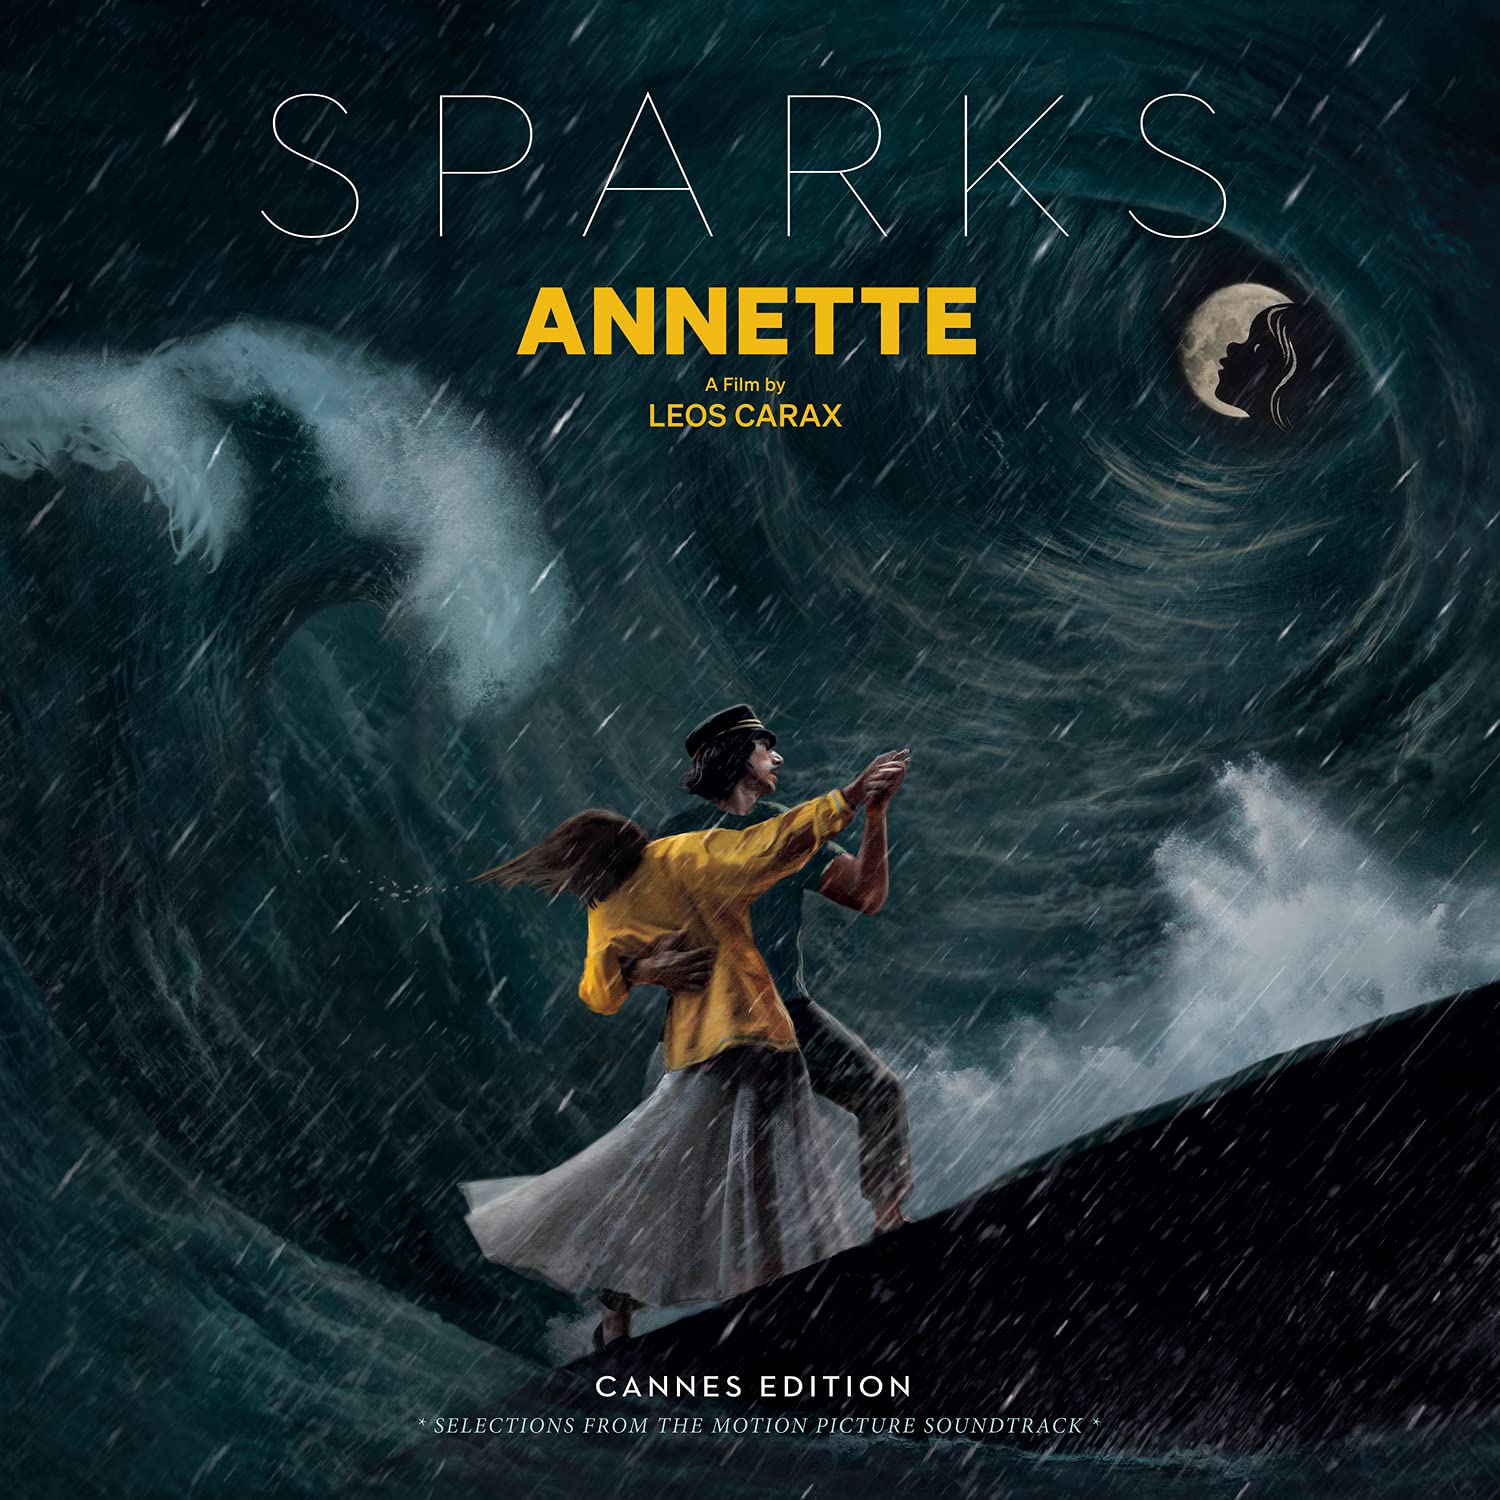 Annette Cannes Edition on Amazon